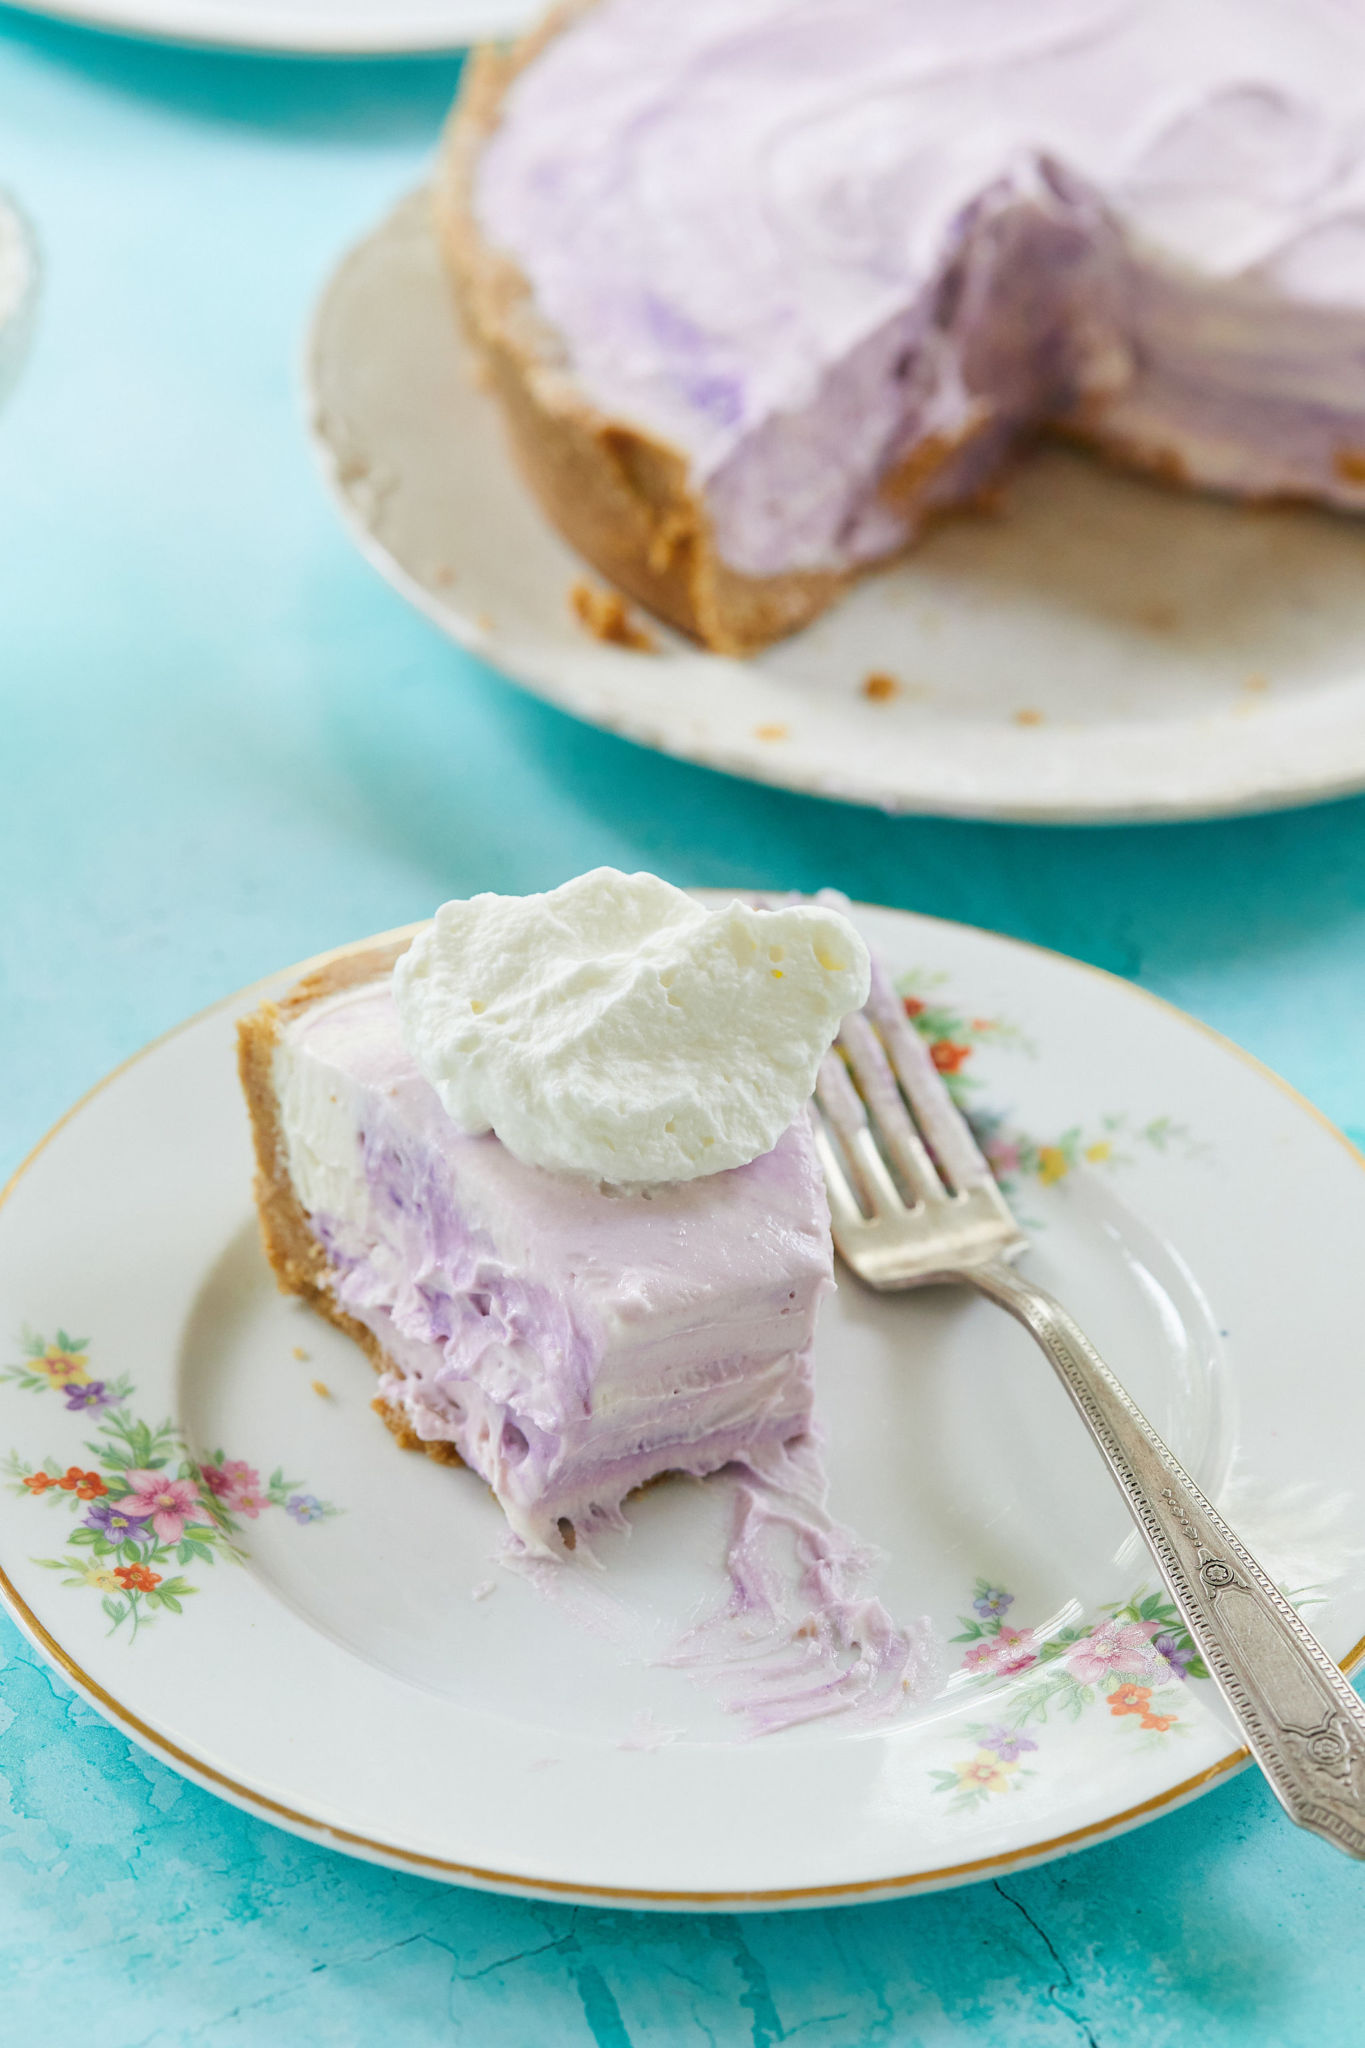 A slice of purple no-bake ube cheesecake with whipped cream on top.